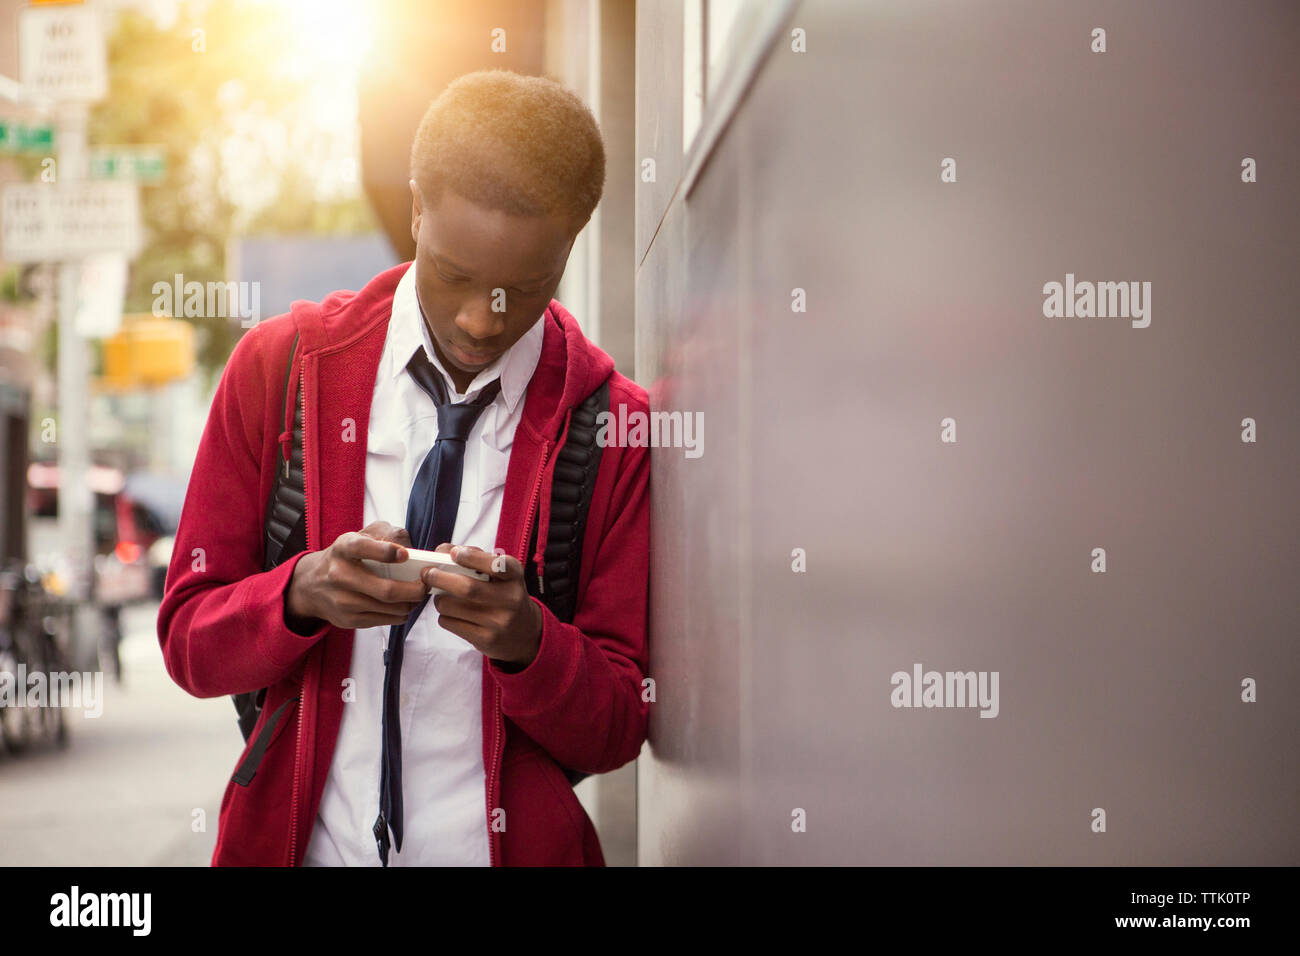 student using phone while leaning on wall in city Stock Photo